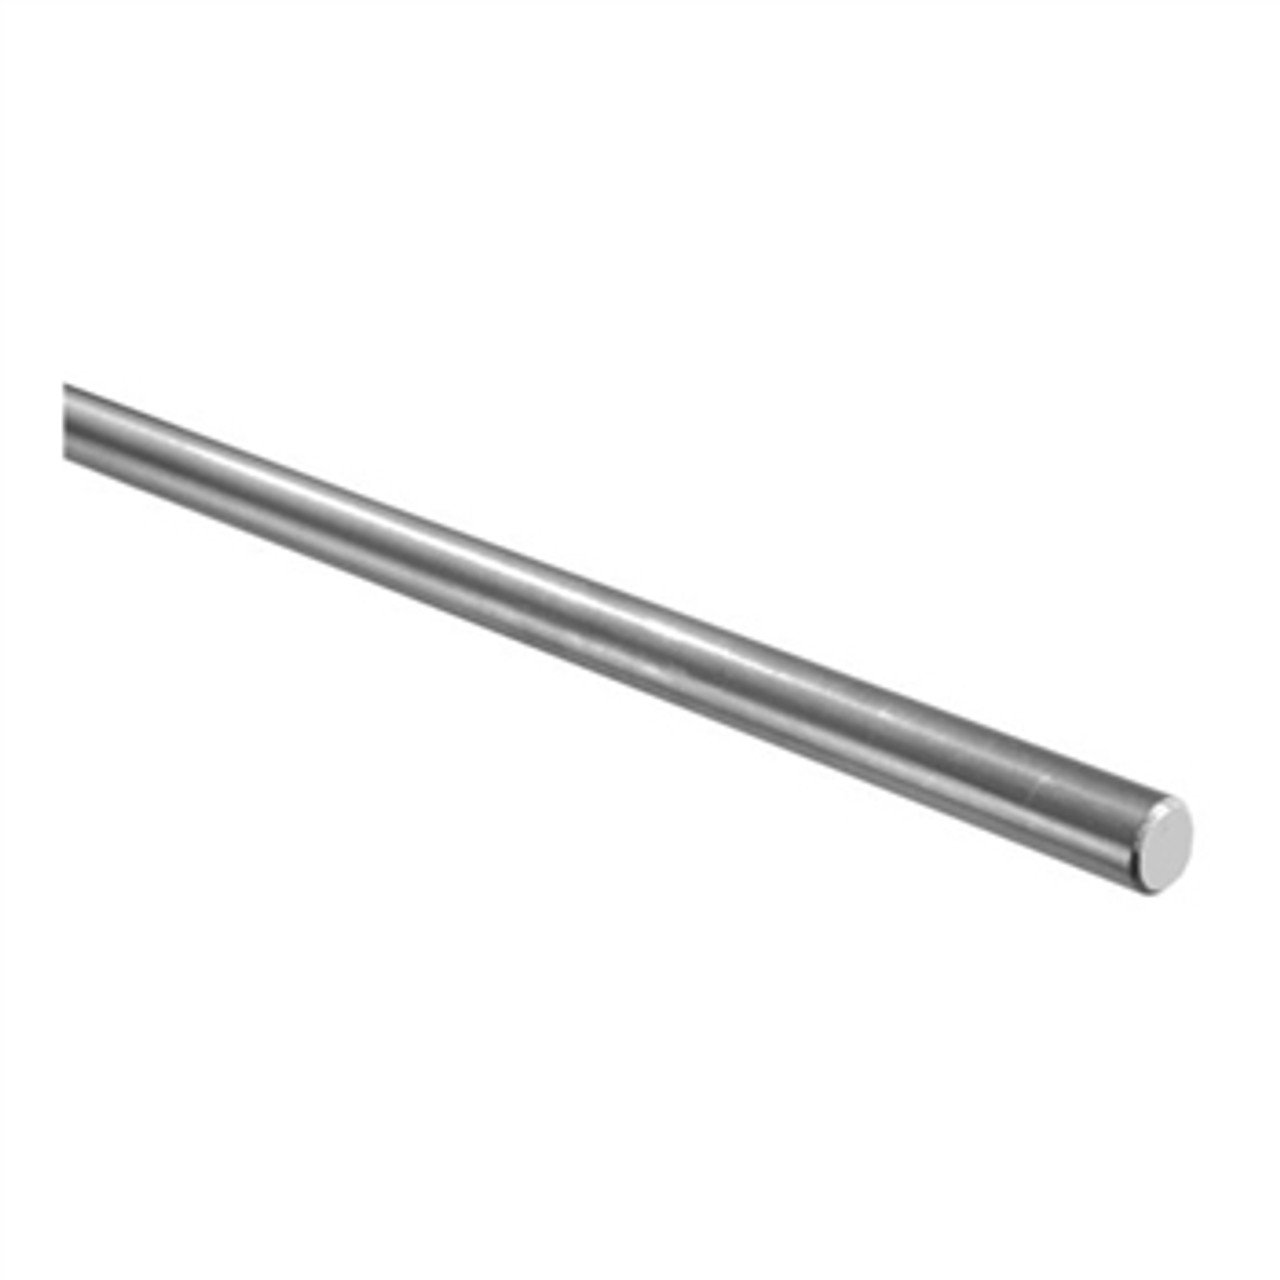 E005 1/2" Stainless Round Bar, 10'